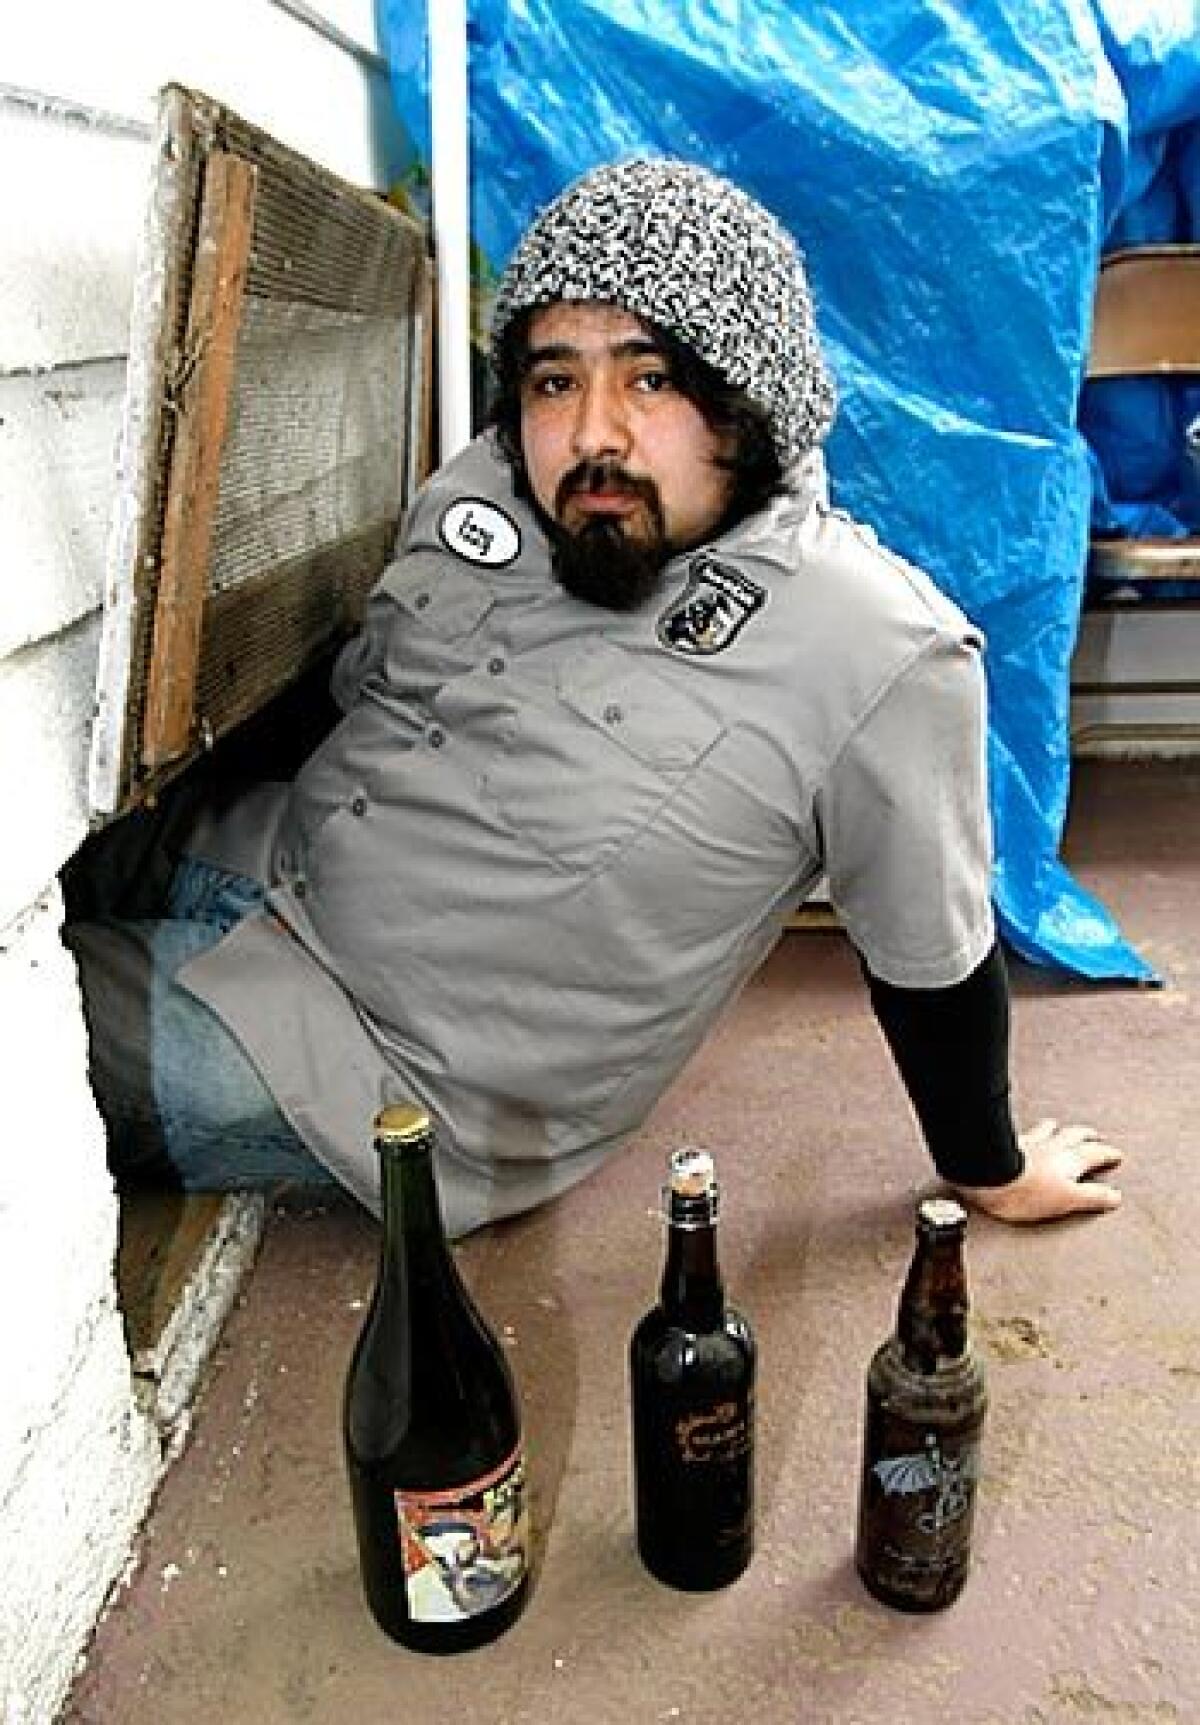 Israel Arrieta stores beer long-term under a house.